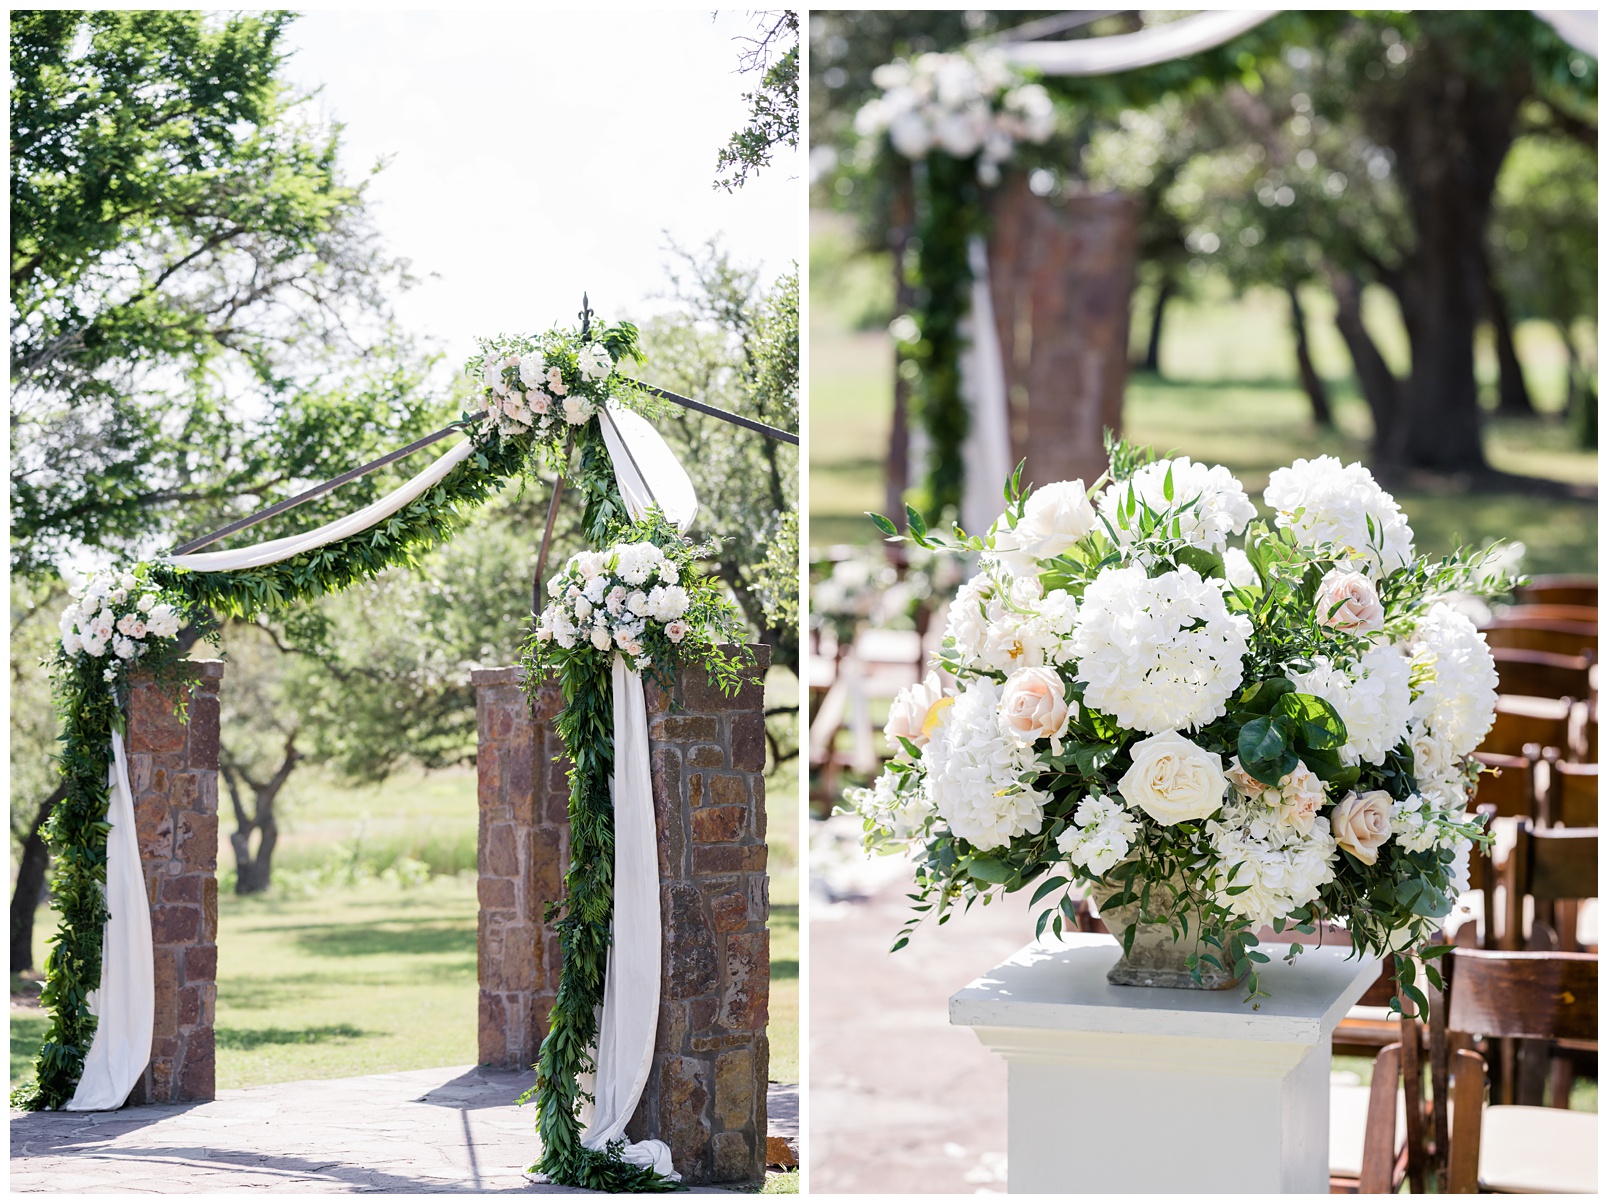 Wild Bunches at Ma Maison Wedding venue in dripping Springs